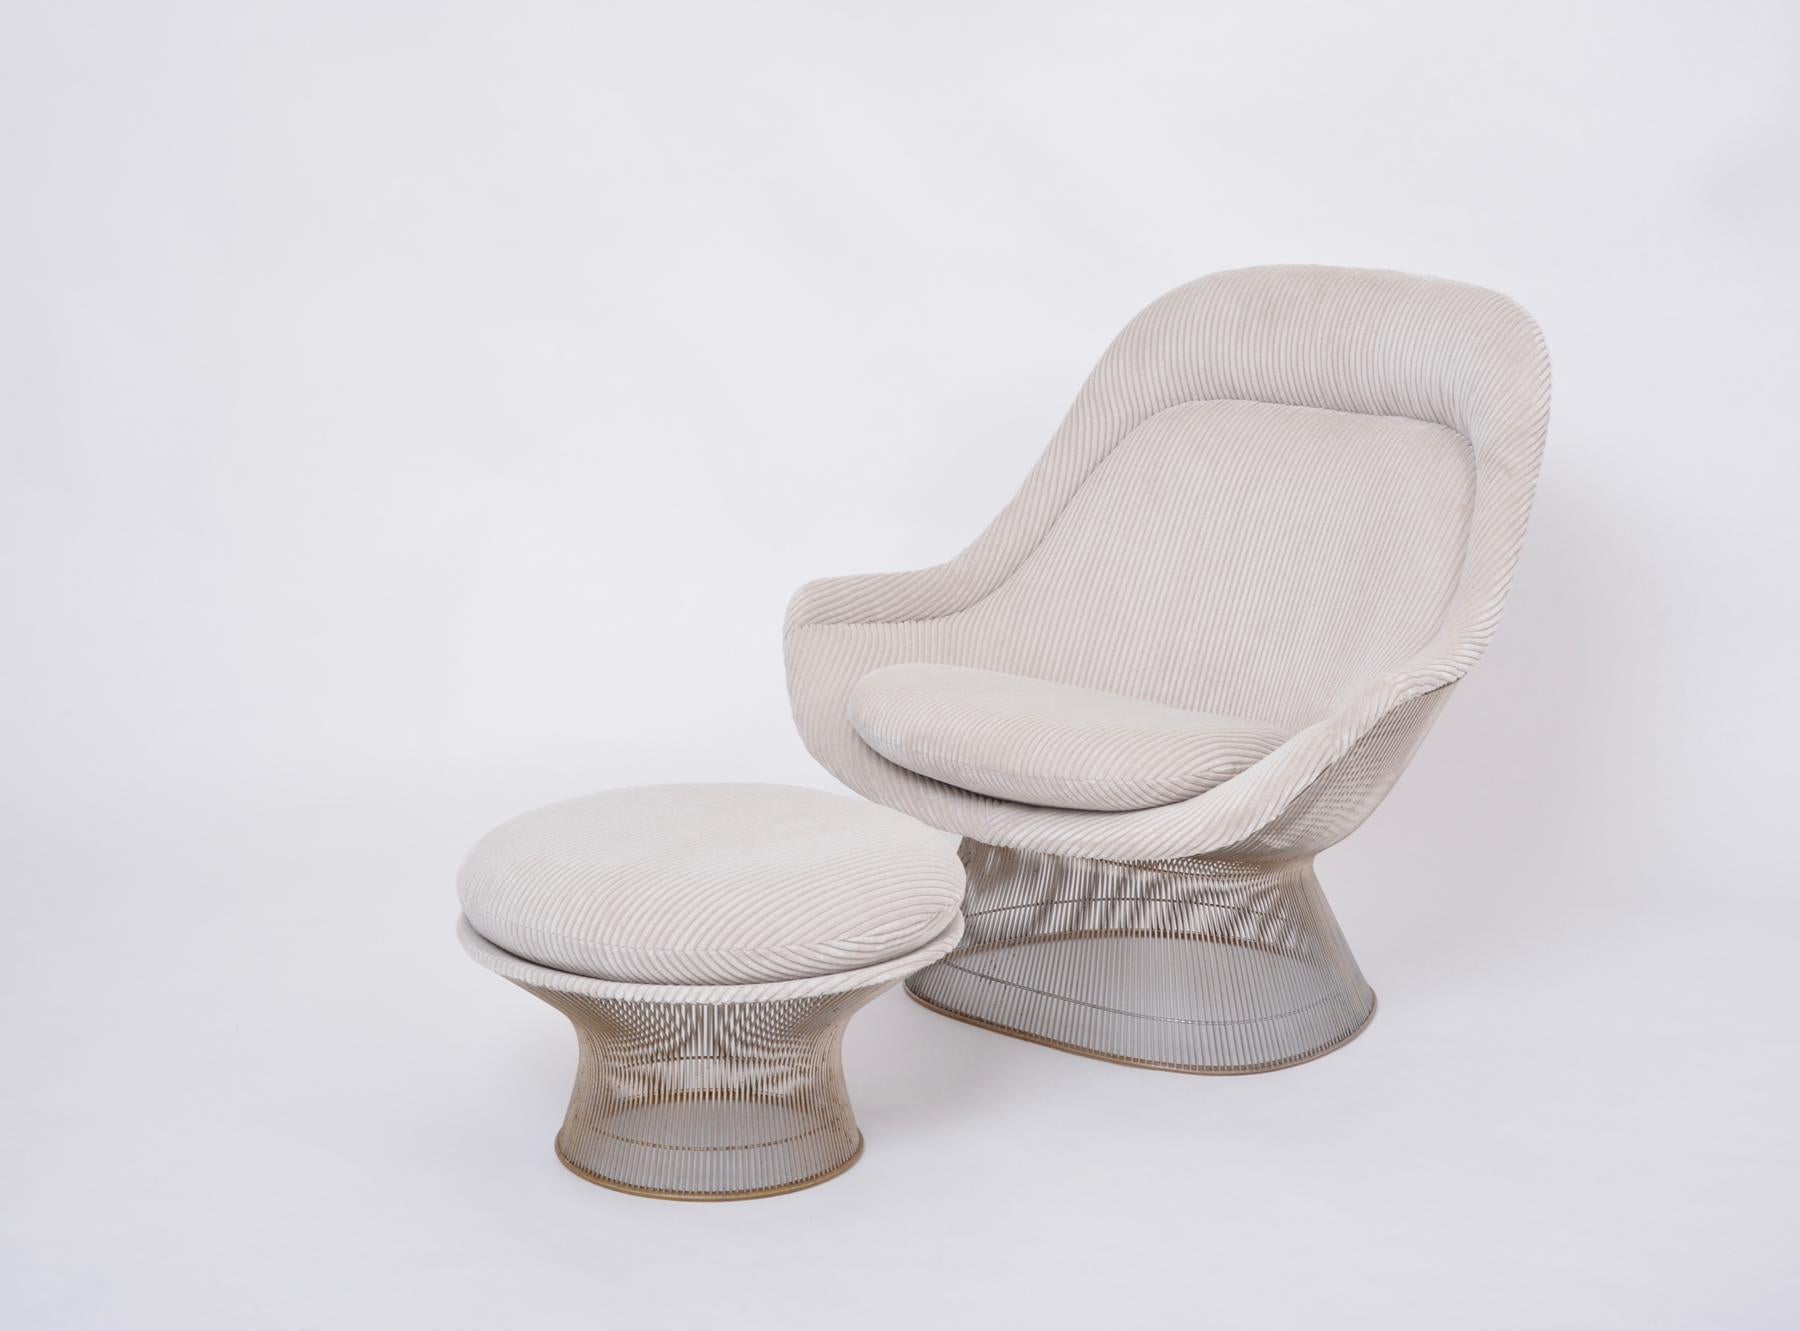 Set of Reupholstered Vintage Warren Platner Easy Chair and Ottoman
Stunning set of a Platner Easy Chair (Model 1705; aka Easy Lounge Chair) reupholstered in light beige velvety soft wide cord, also known as cable cord, with 10 ribs on 10 cm of